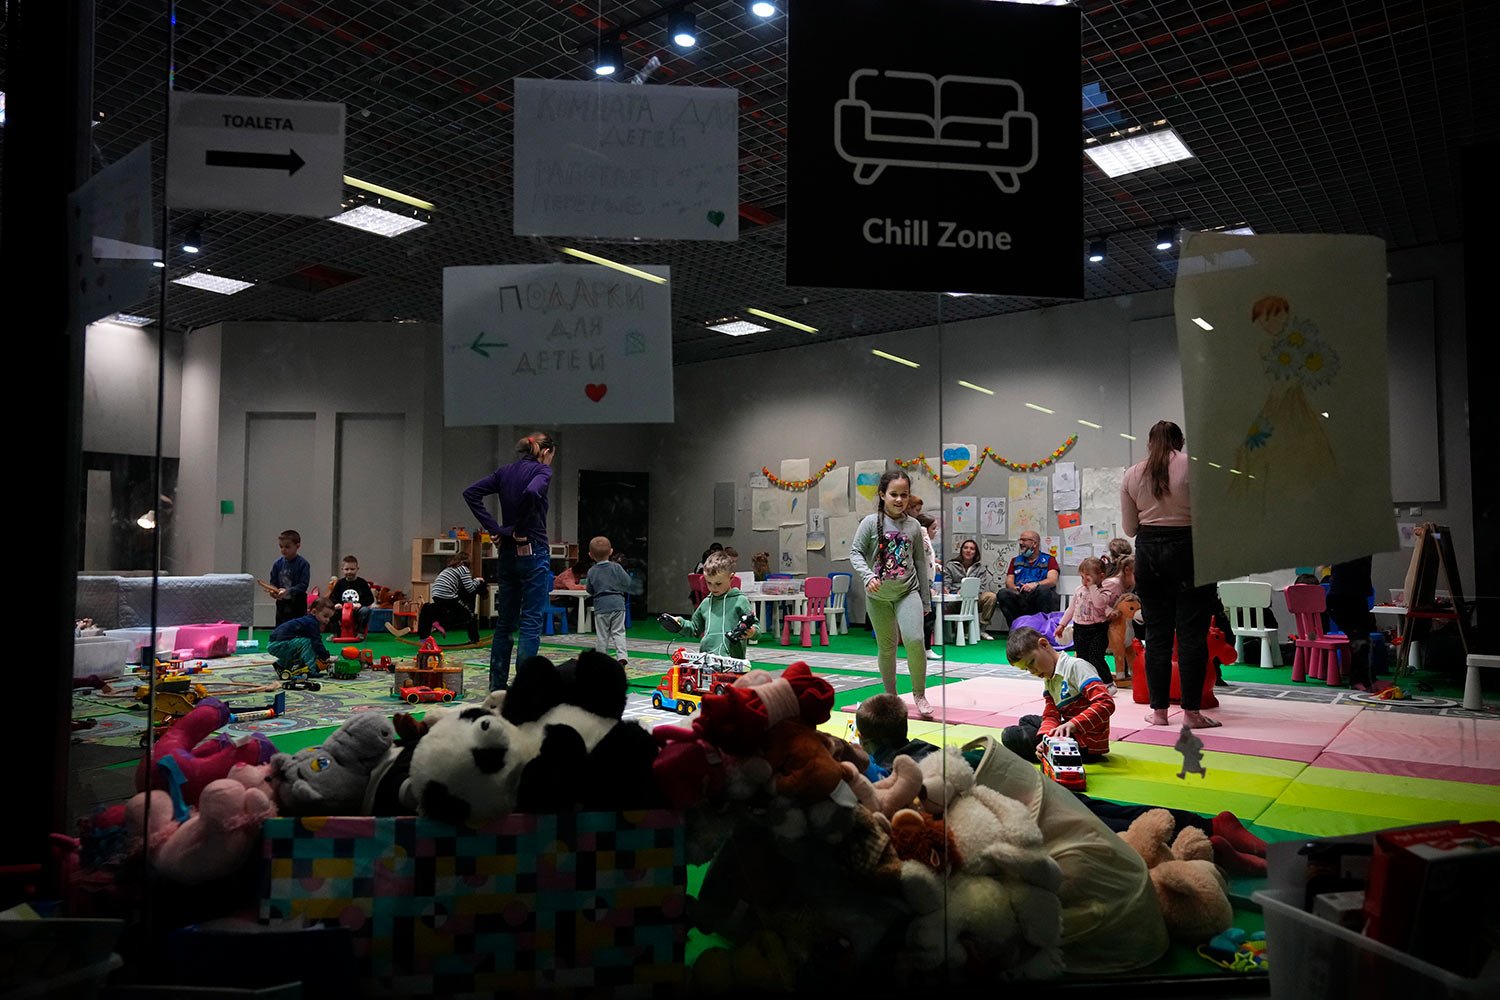  Children from Ukraine play at an exhibition hall, turned into a refugee center in Nadarzyn, near Warsaw, Poland, on Wednesday, March 23, 2022. (AP Photo/Petr David Josek) 